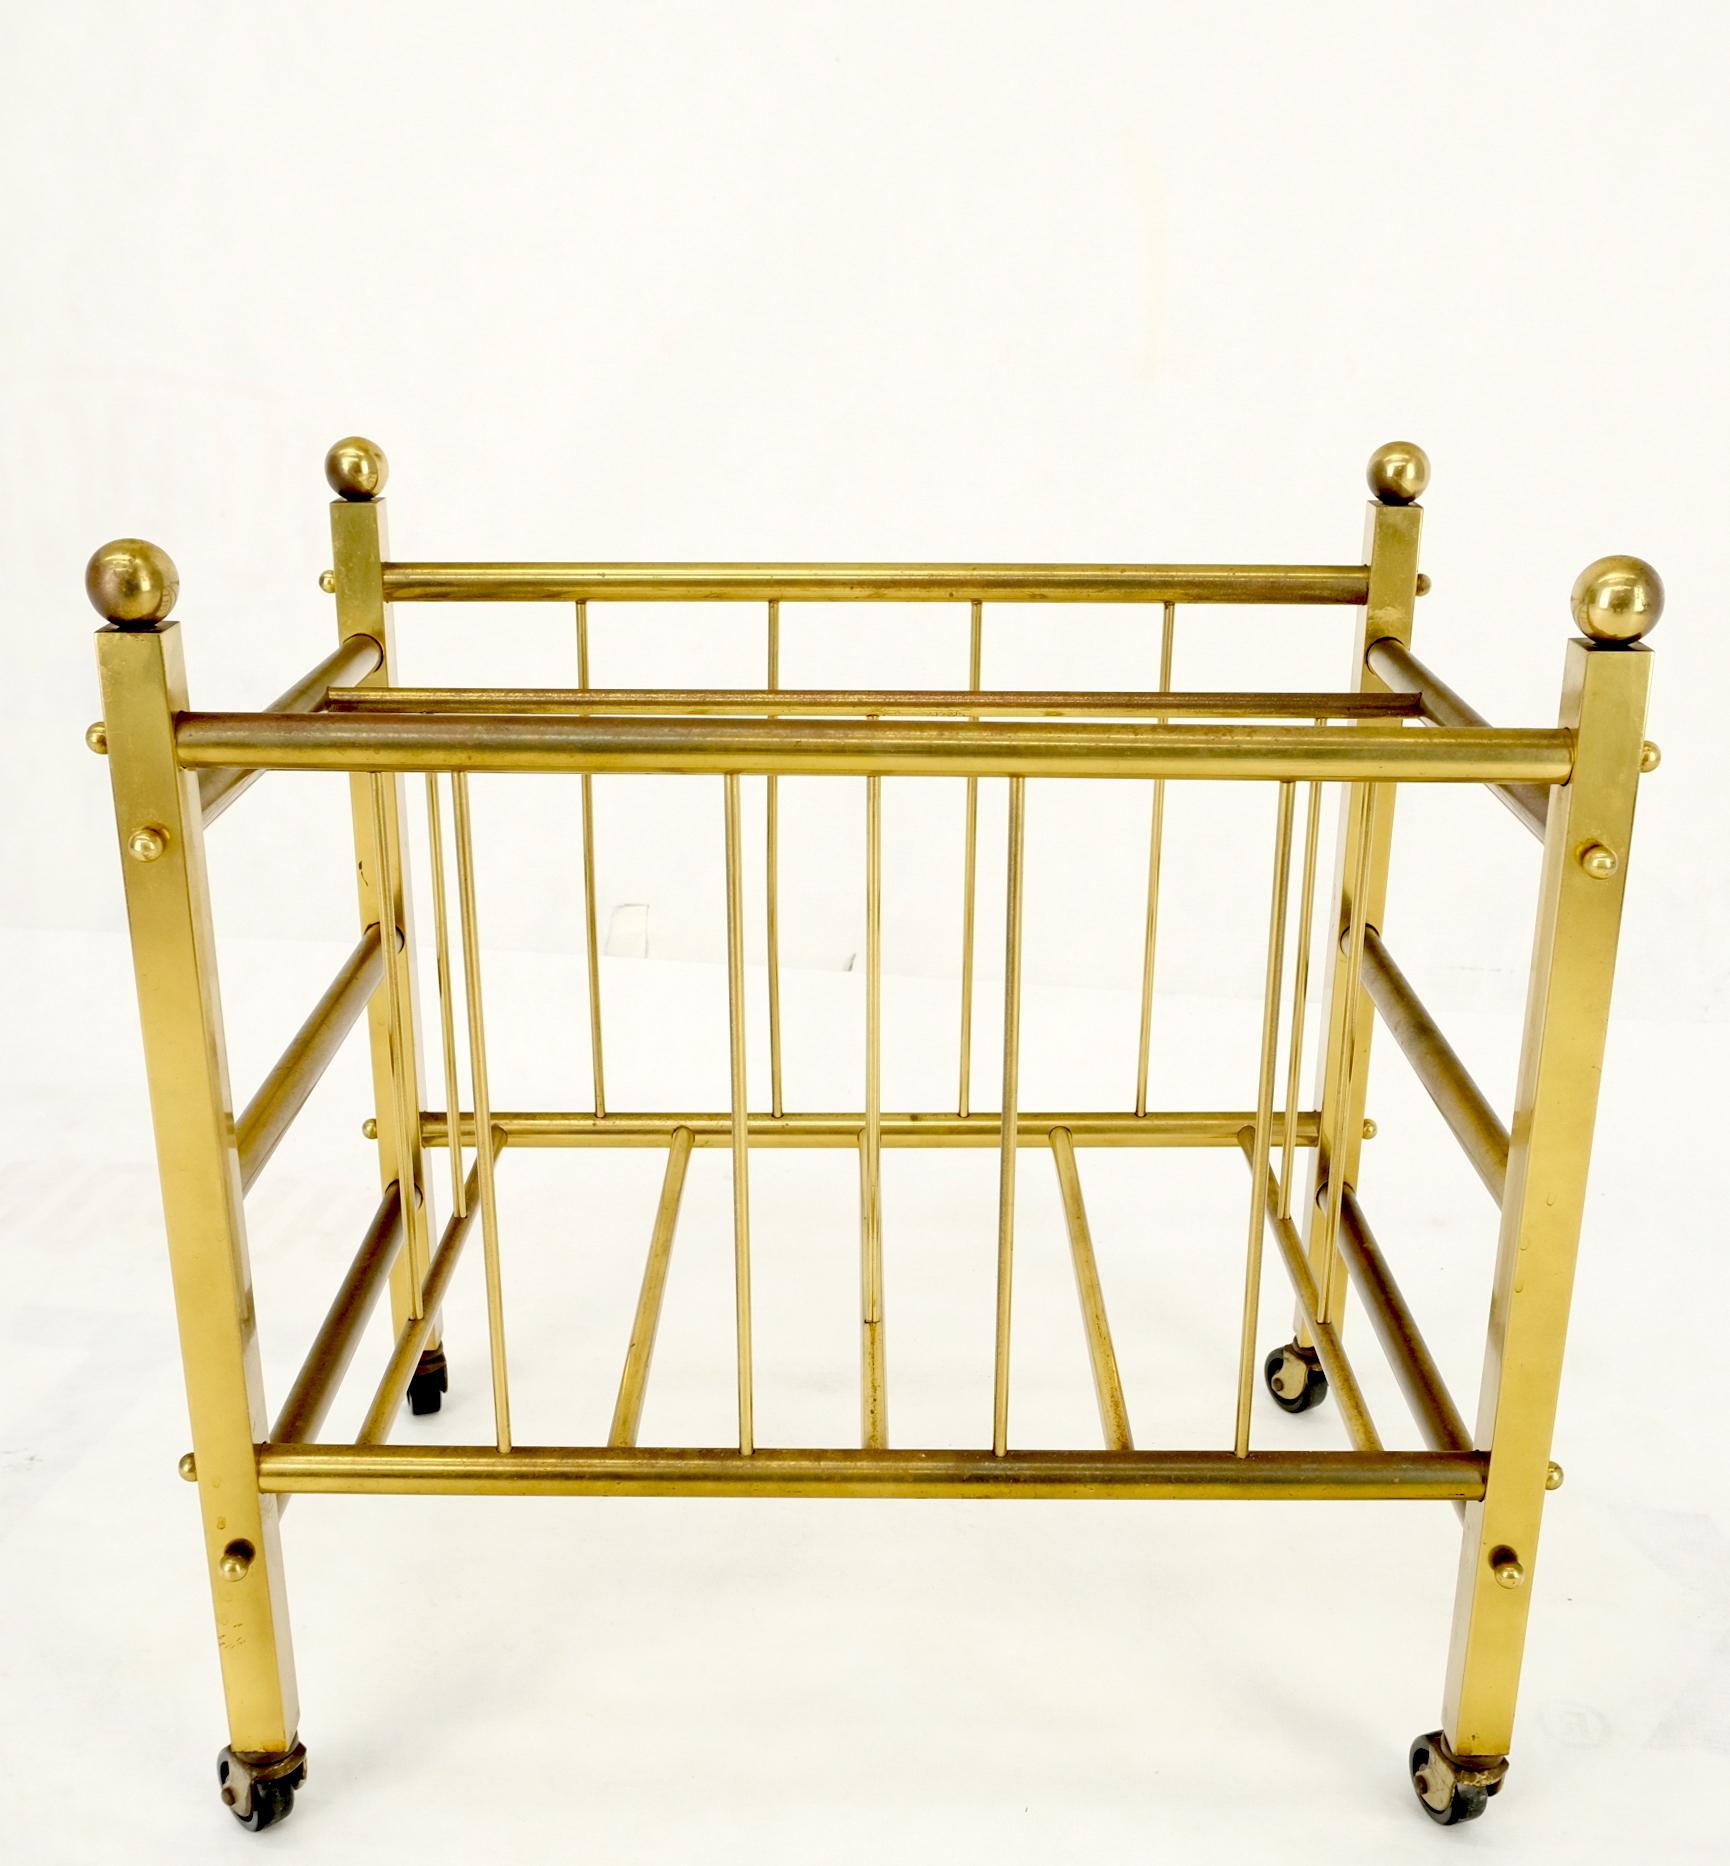 Solid Brass Tube Design Mid-Century Modern Magazine Stand on Casters For Sale 5